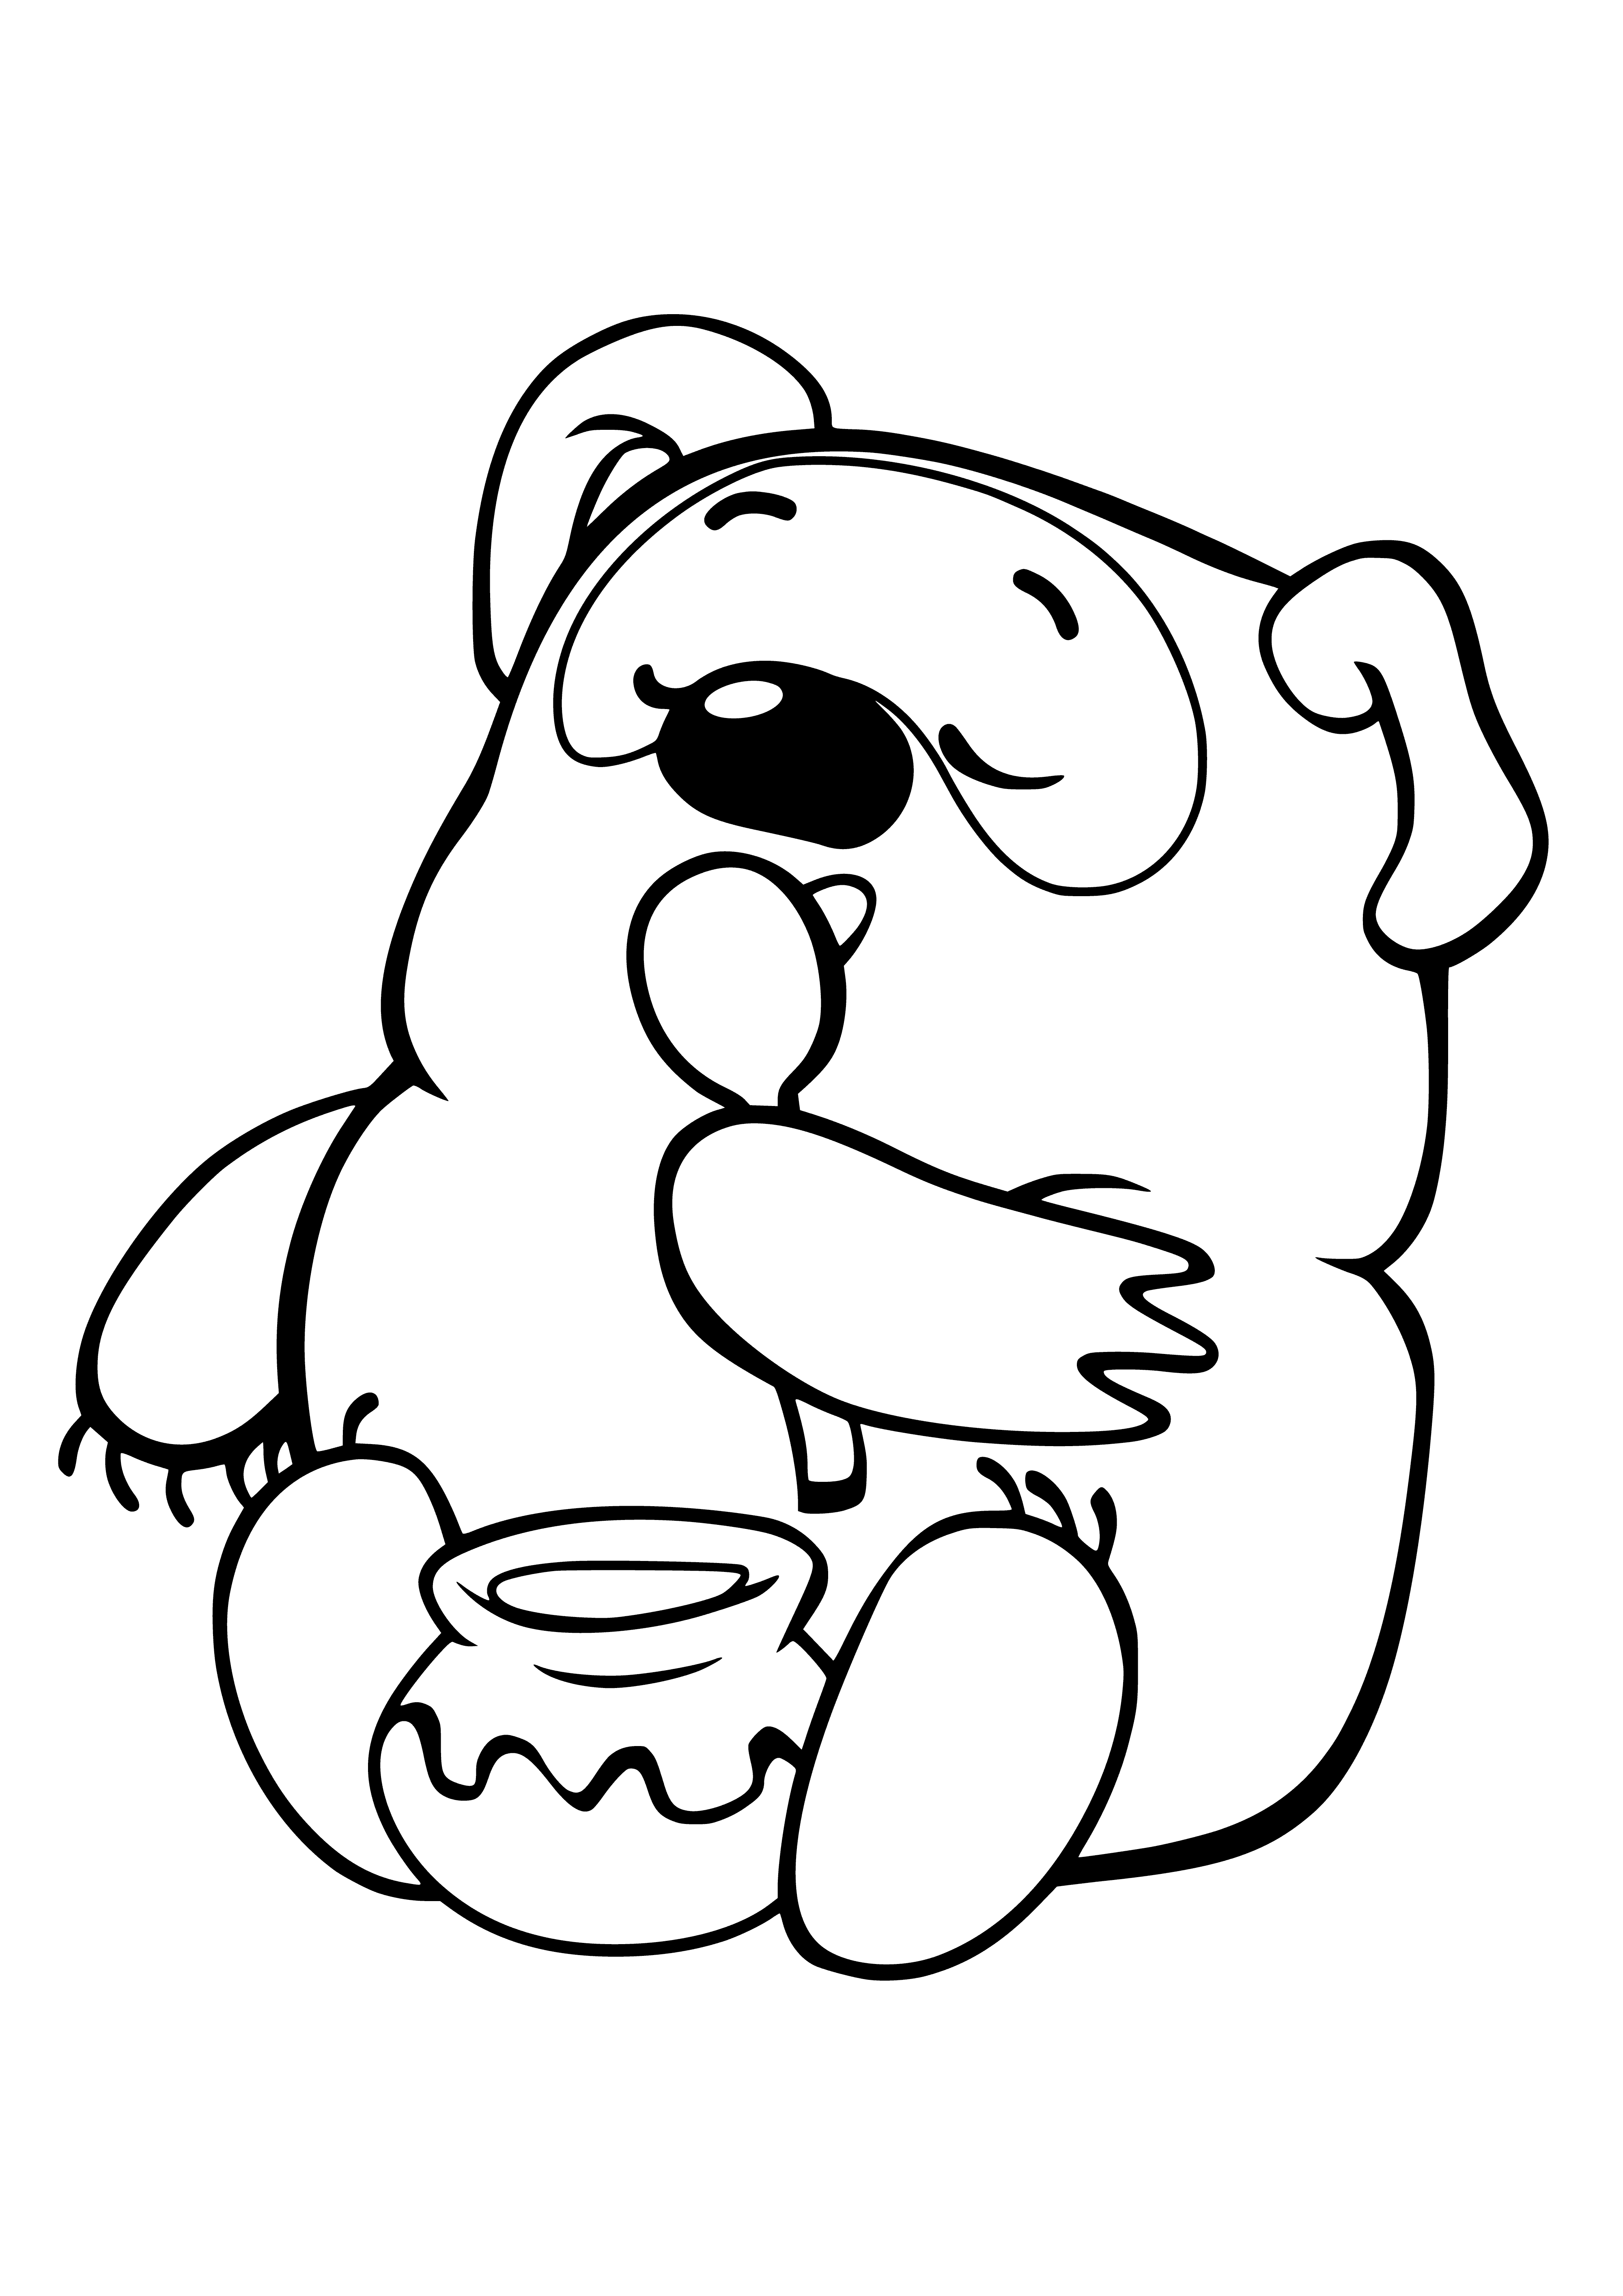 coloring page: Winnie the Pooh is joyfully eating honey from a jar, looking content and smiling.